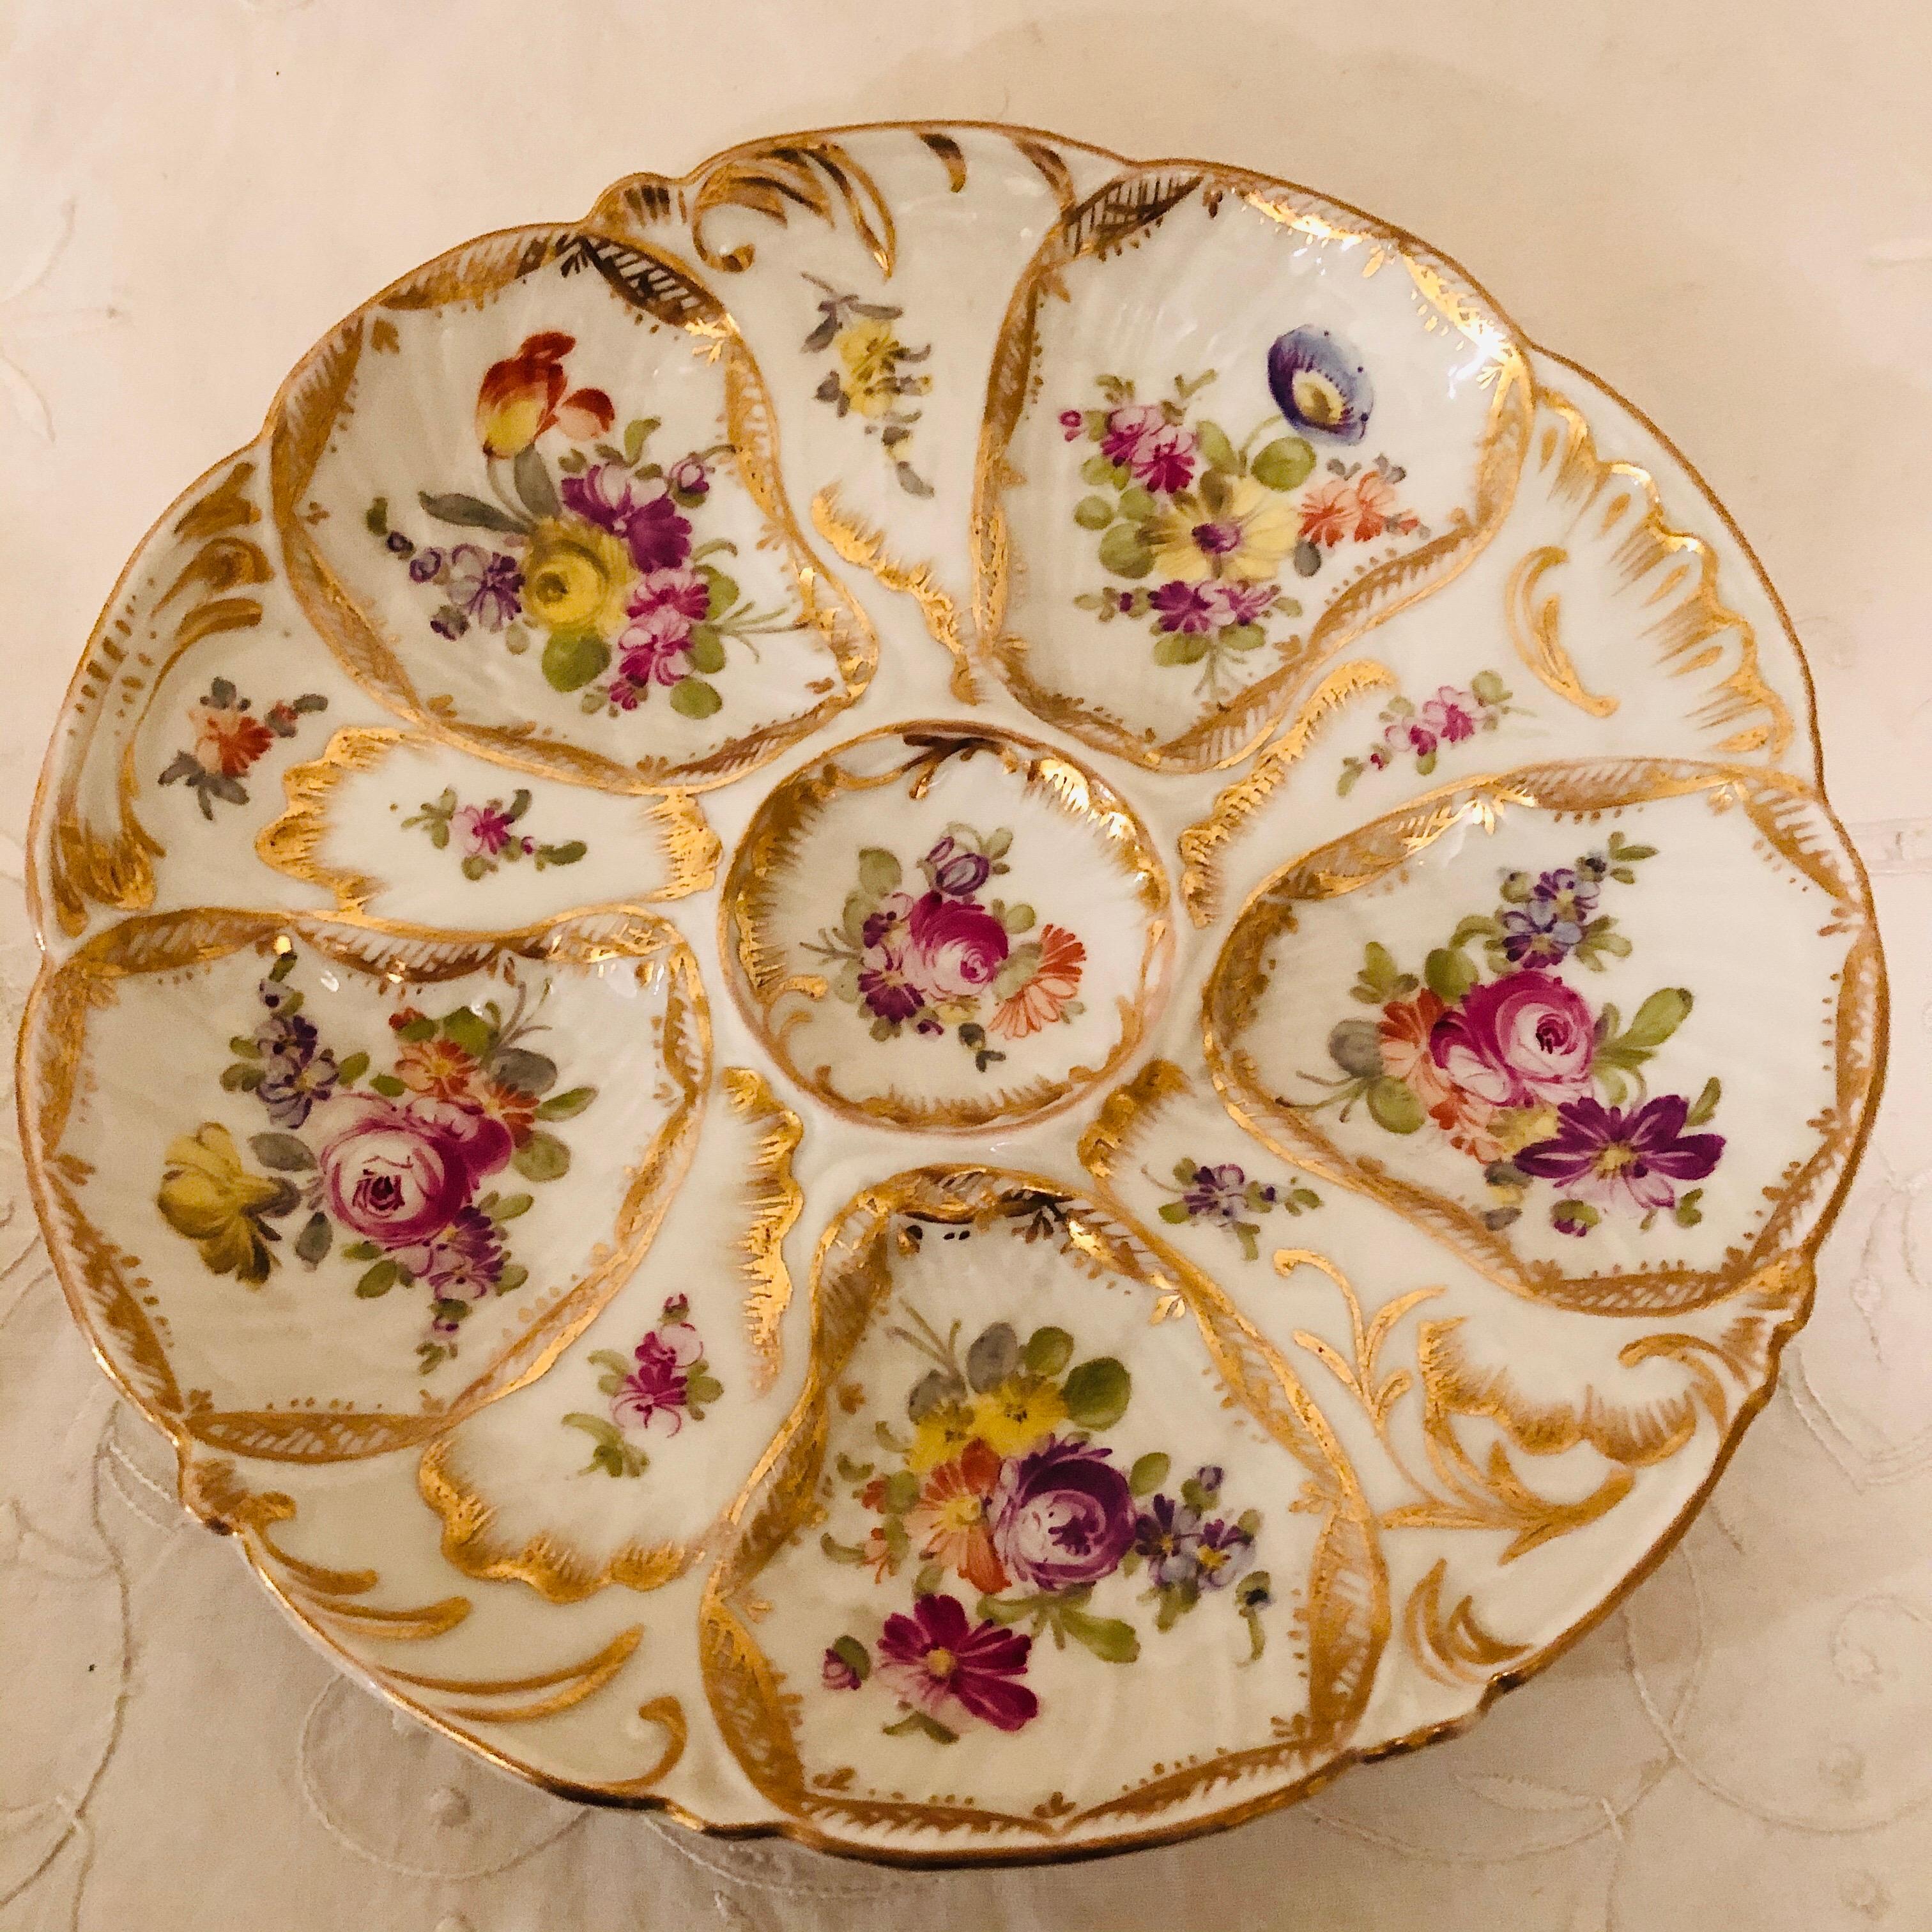 I want to present you with this rare set of eight Dresden fluted oyster plates, each painted differently with different sprays of flowers. These were designed by Franziska Hirsch at Dresden in the 1890s. Each oyster plate has five wells for oysters